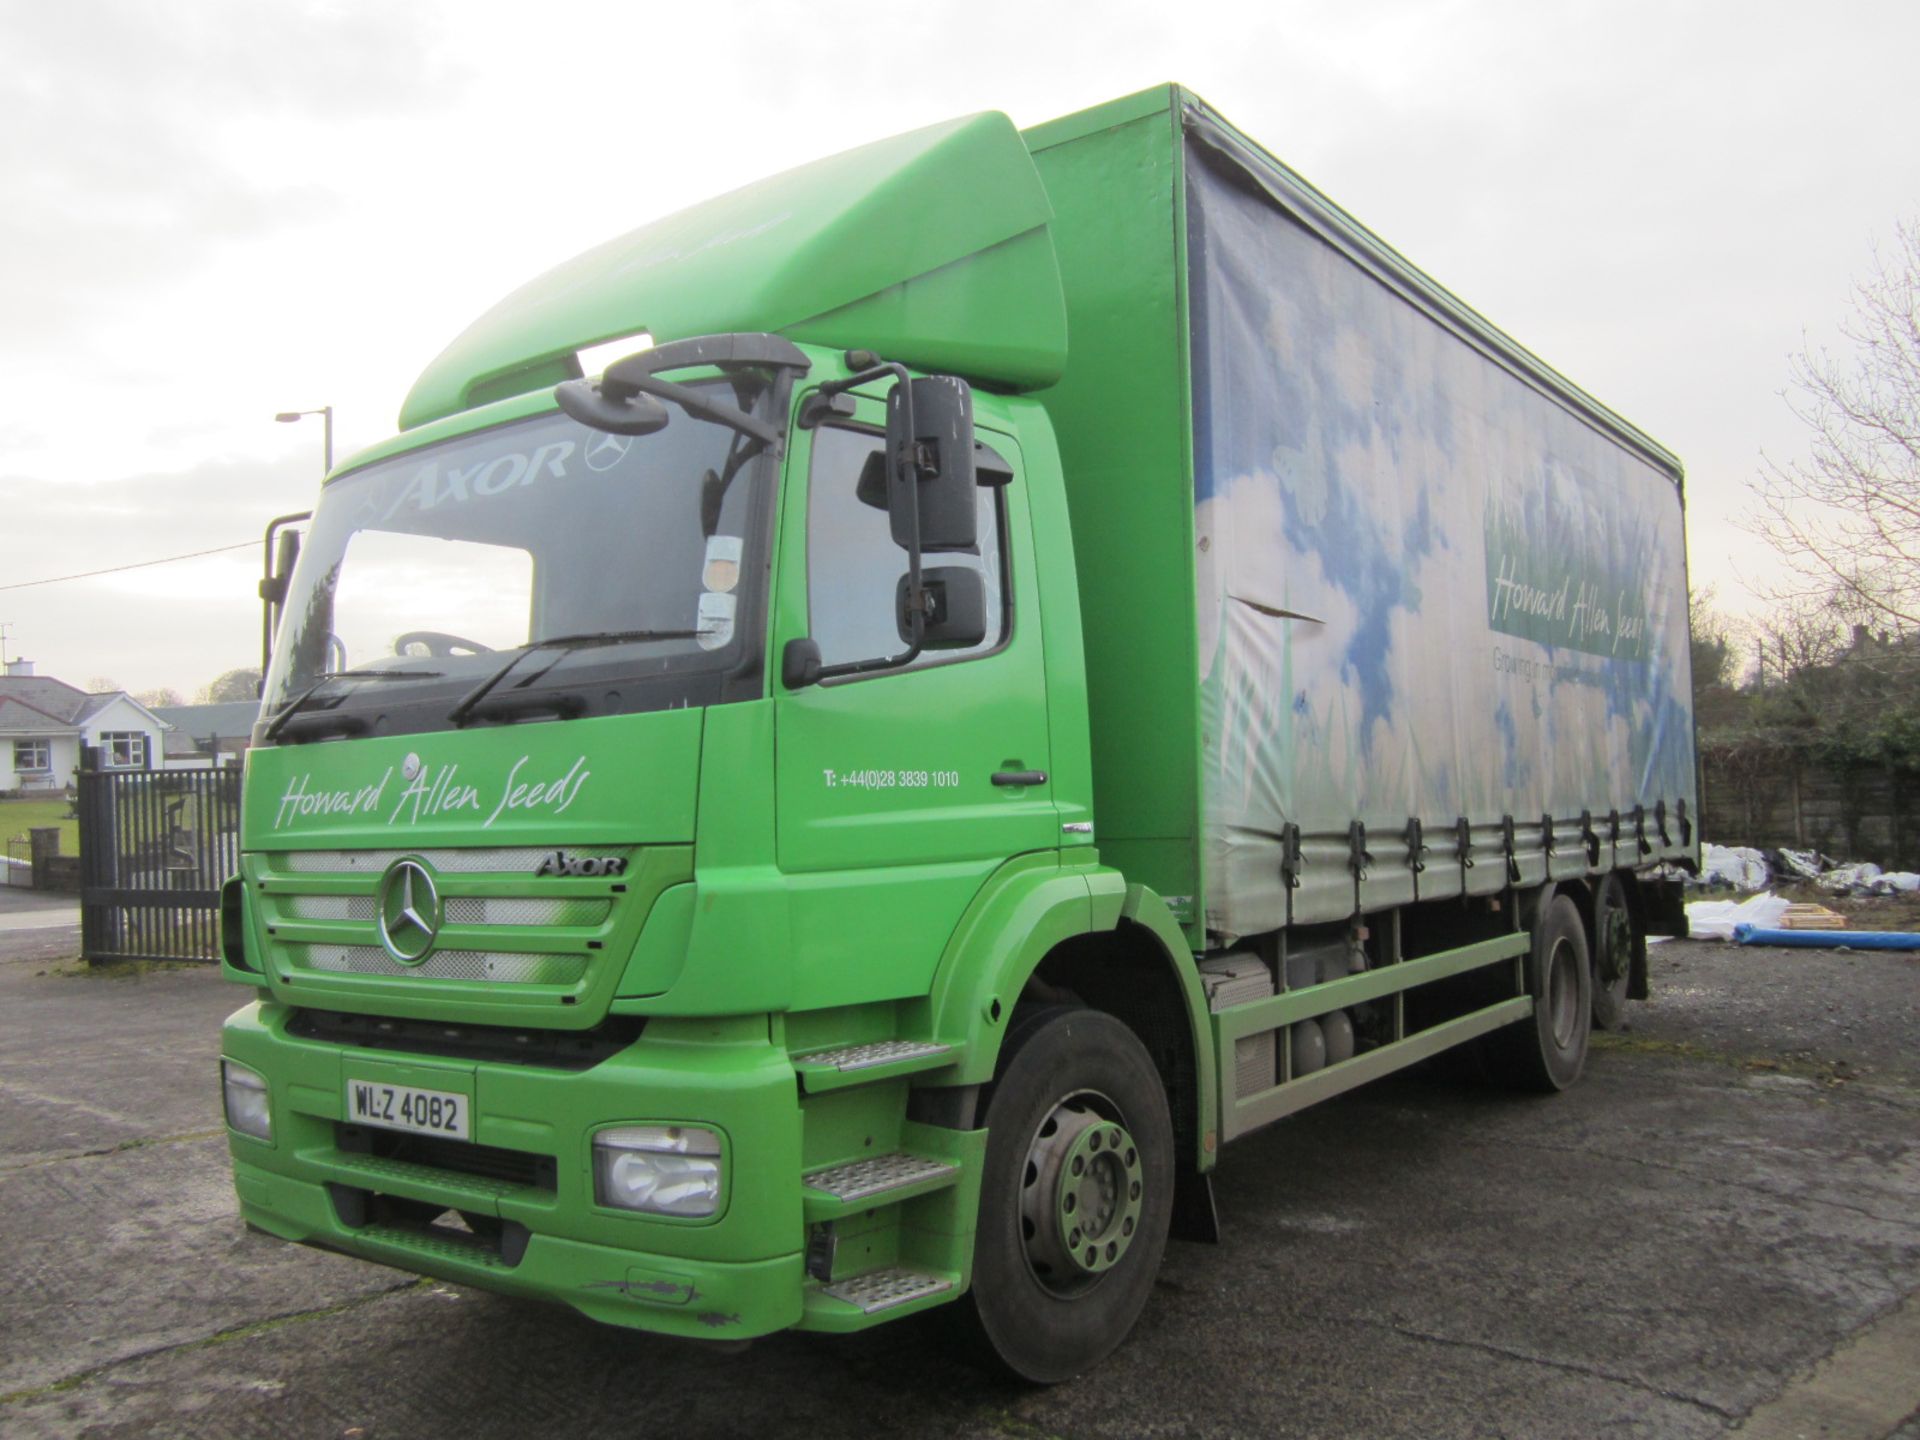 2008 Mercedes Axor 6x2 Curtain Sider, Rear Lift Axle, 26t Gross, 463kms, WLZ 4082 - Image 3 of 10